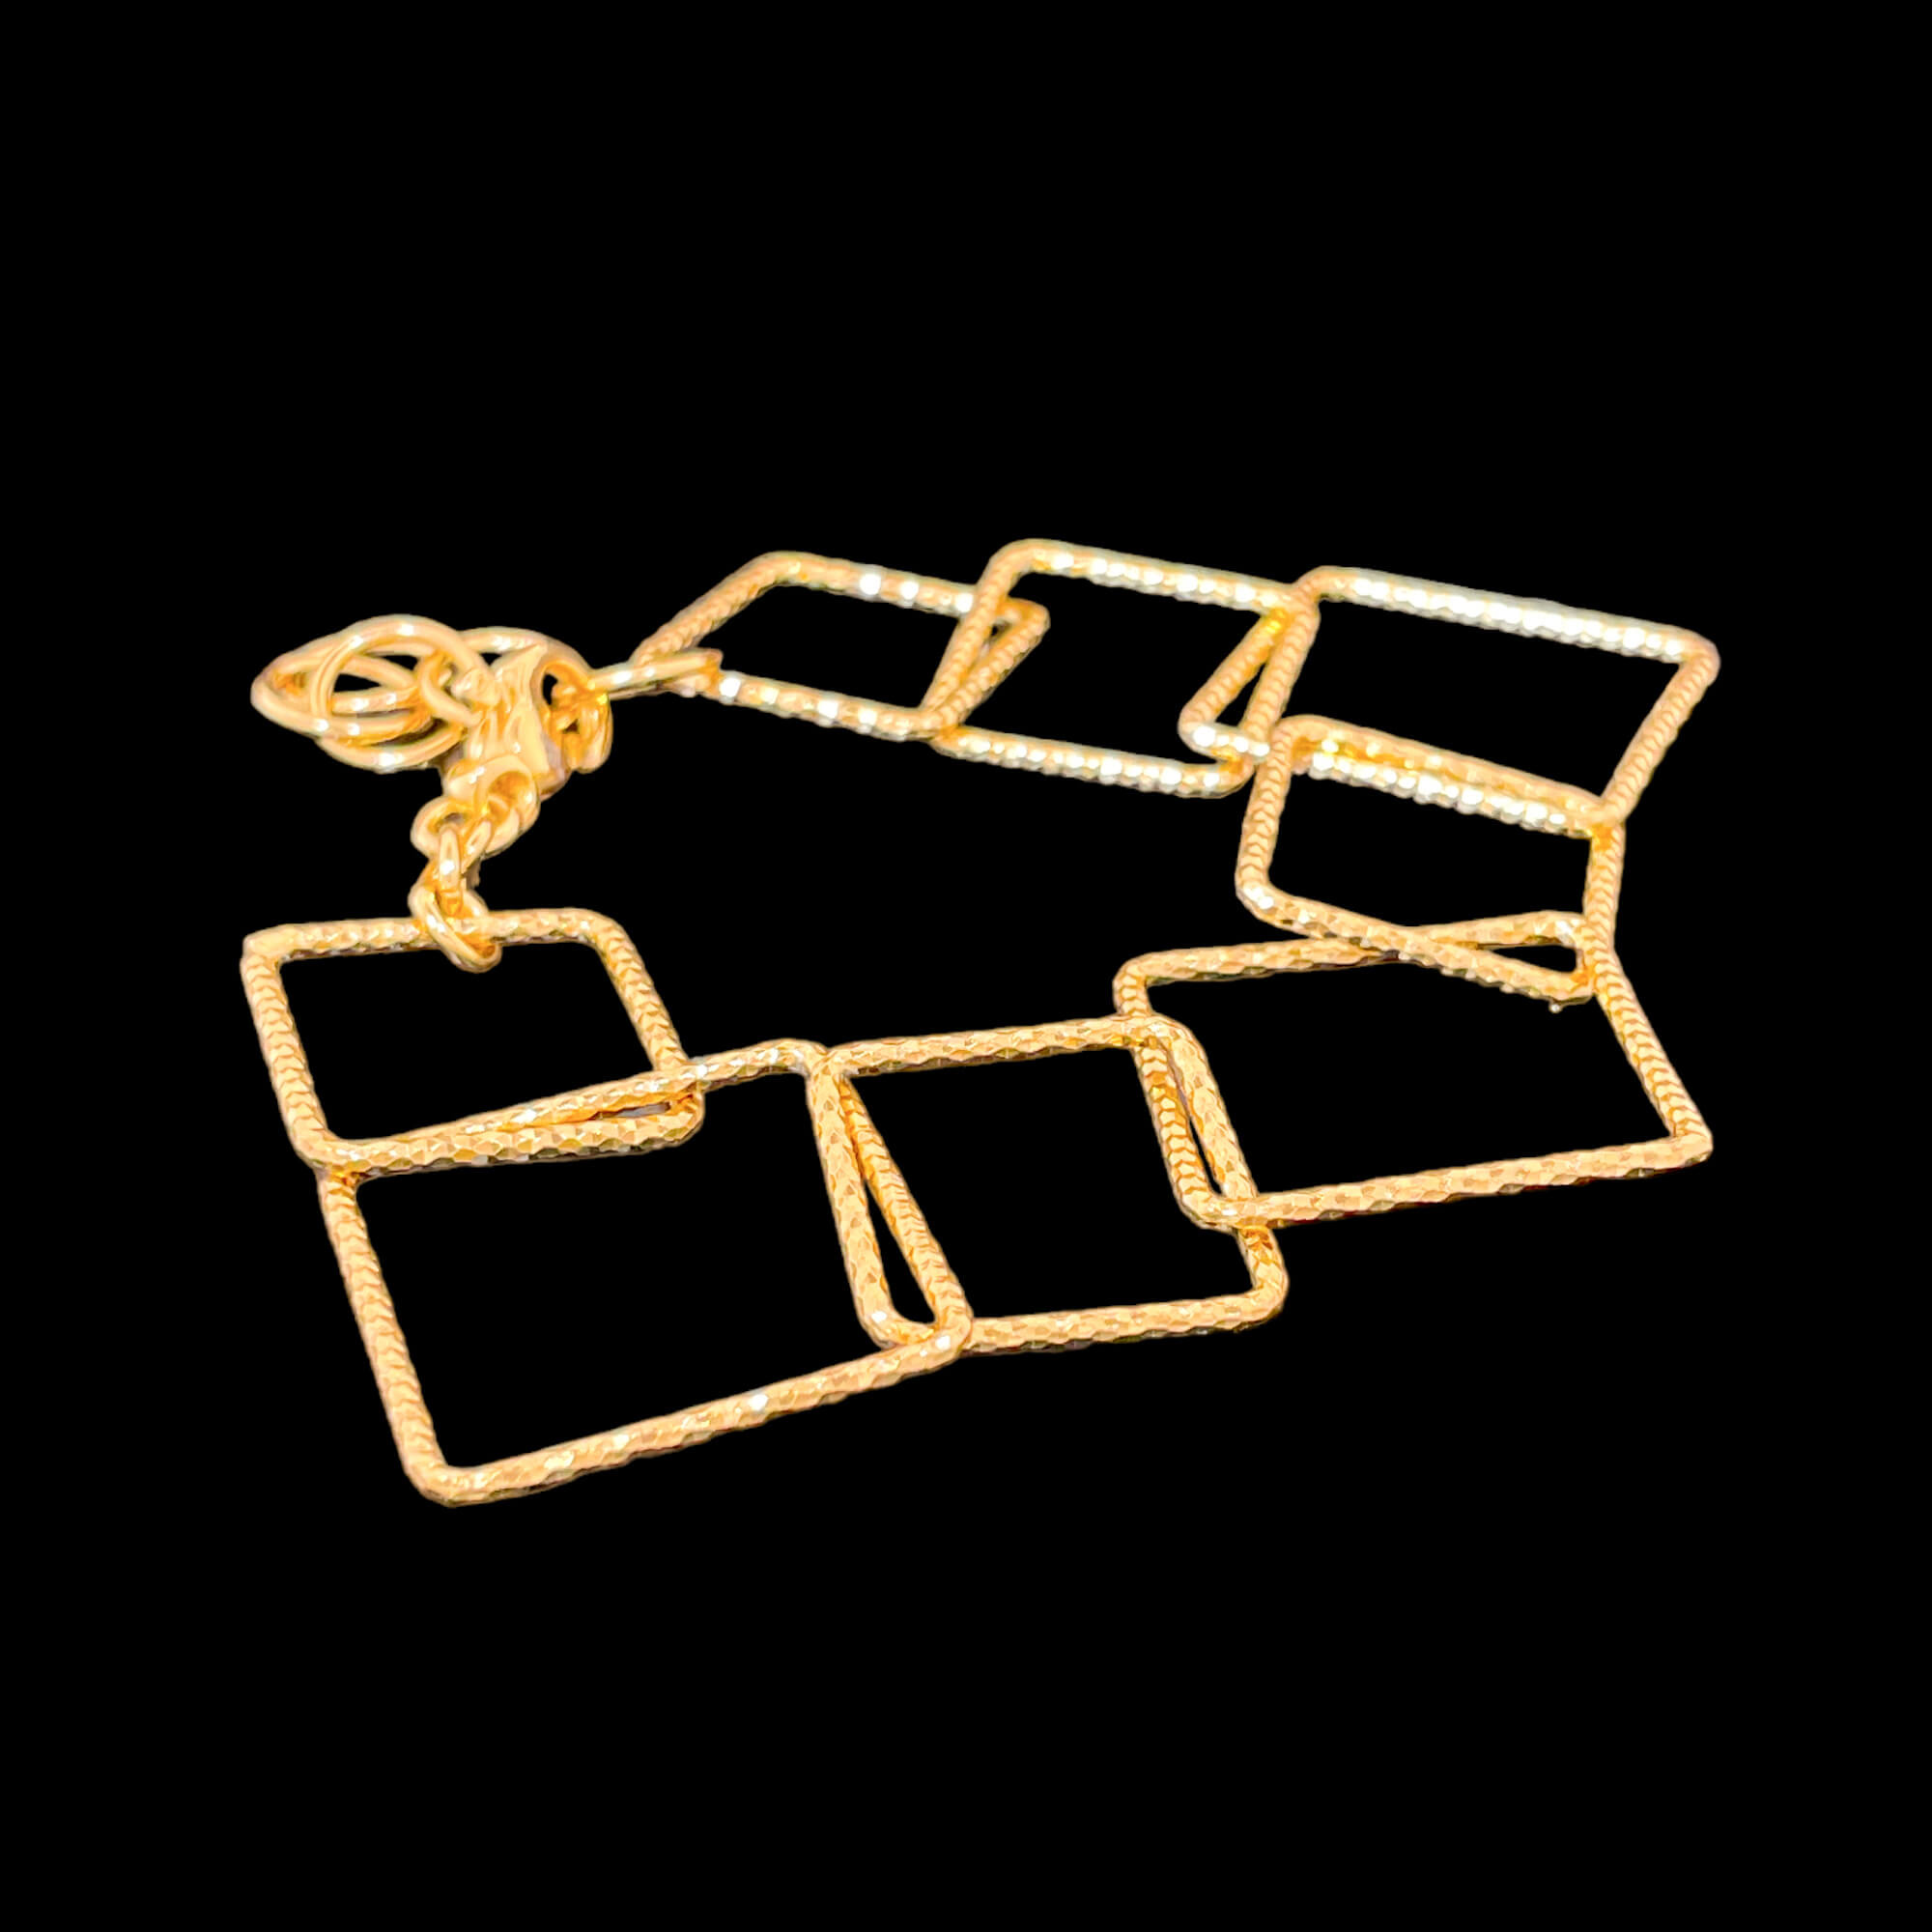 Gilded bracelet with open squares